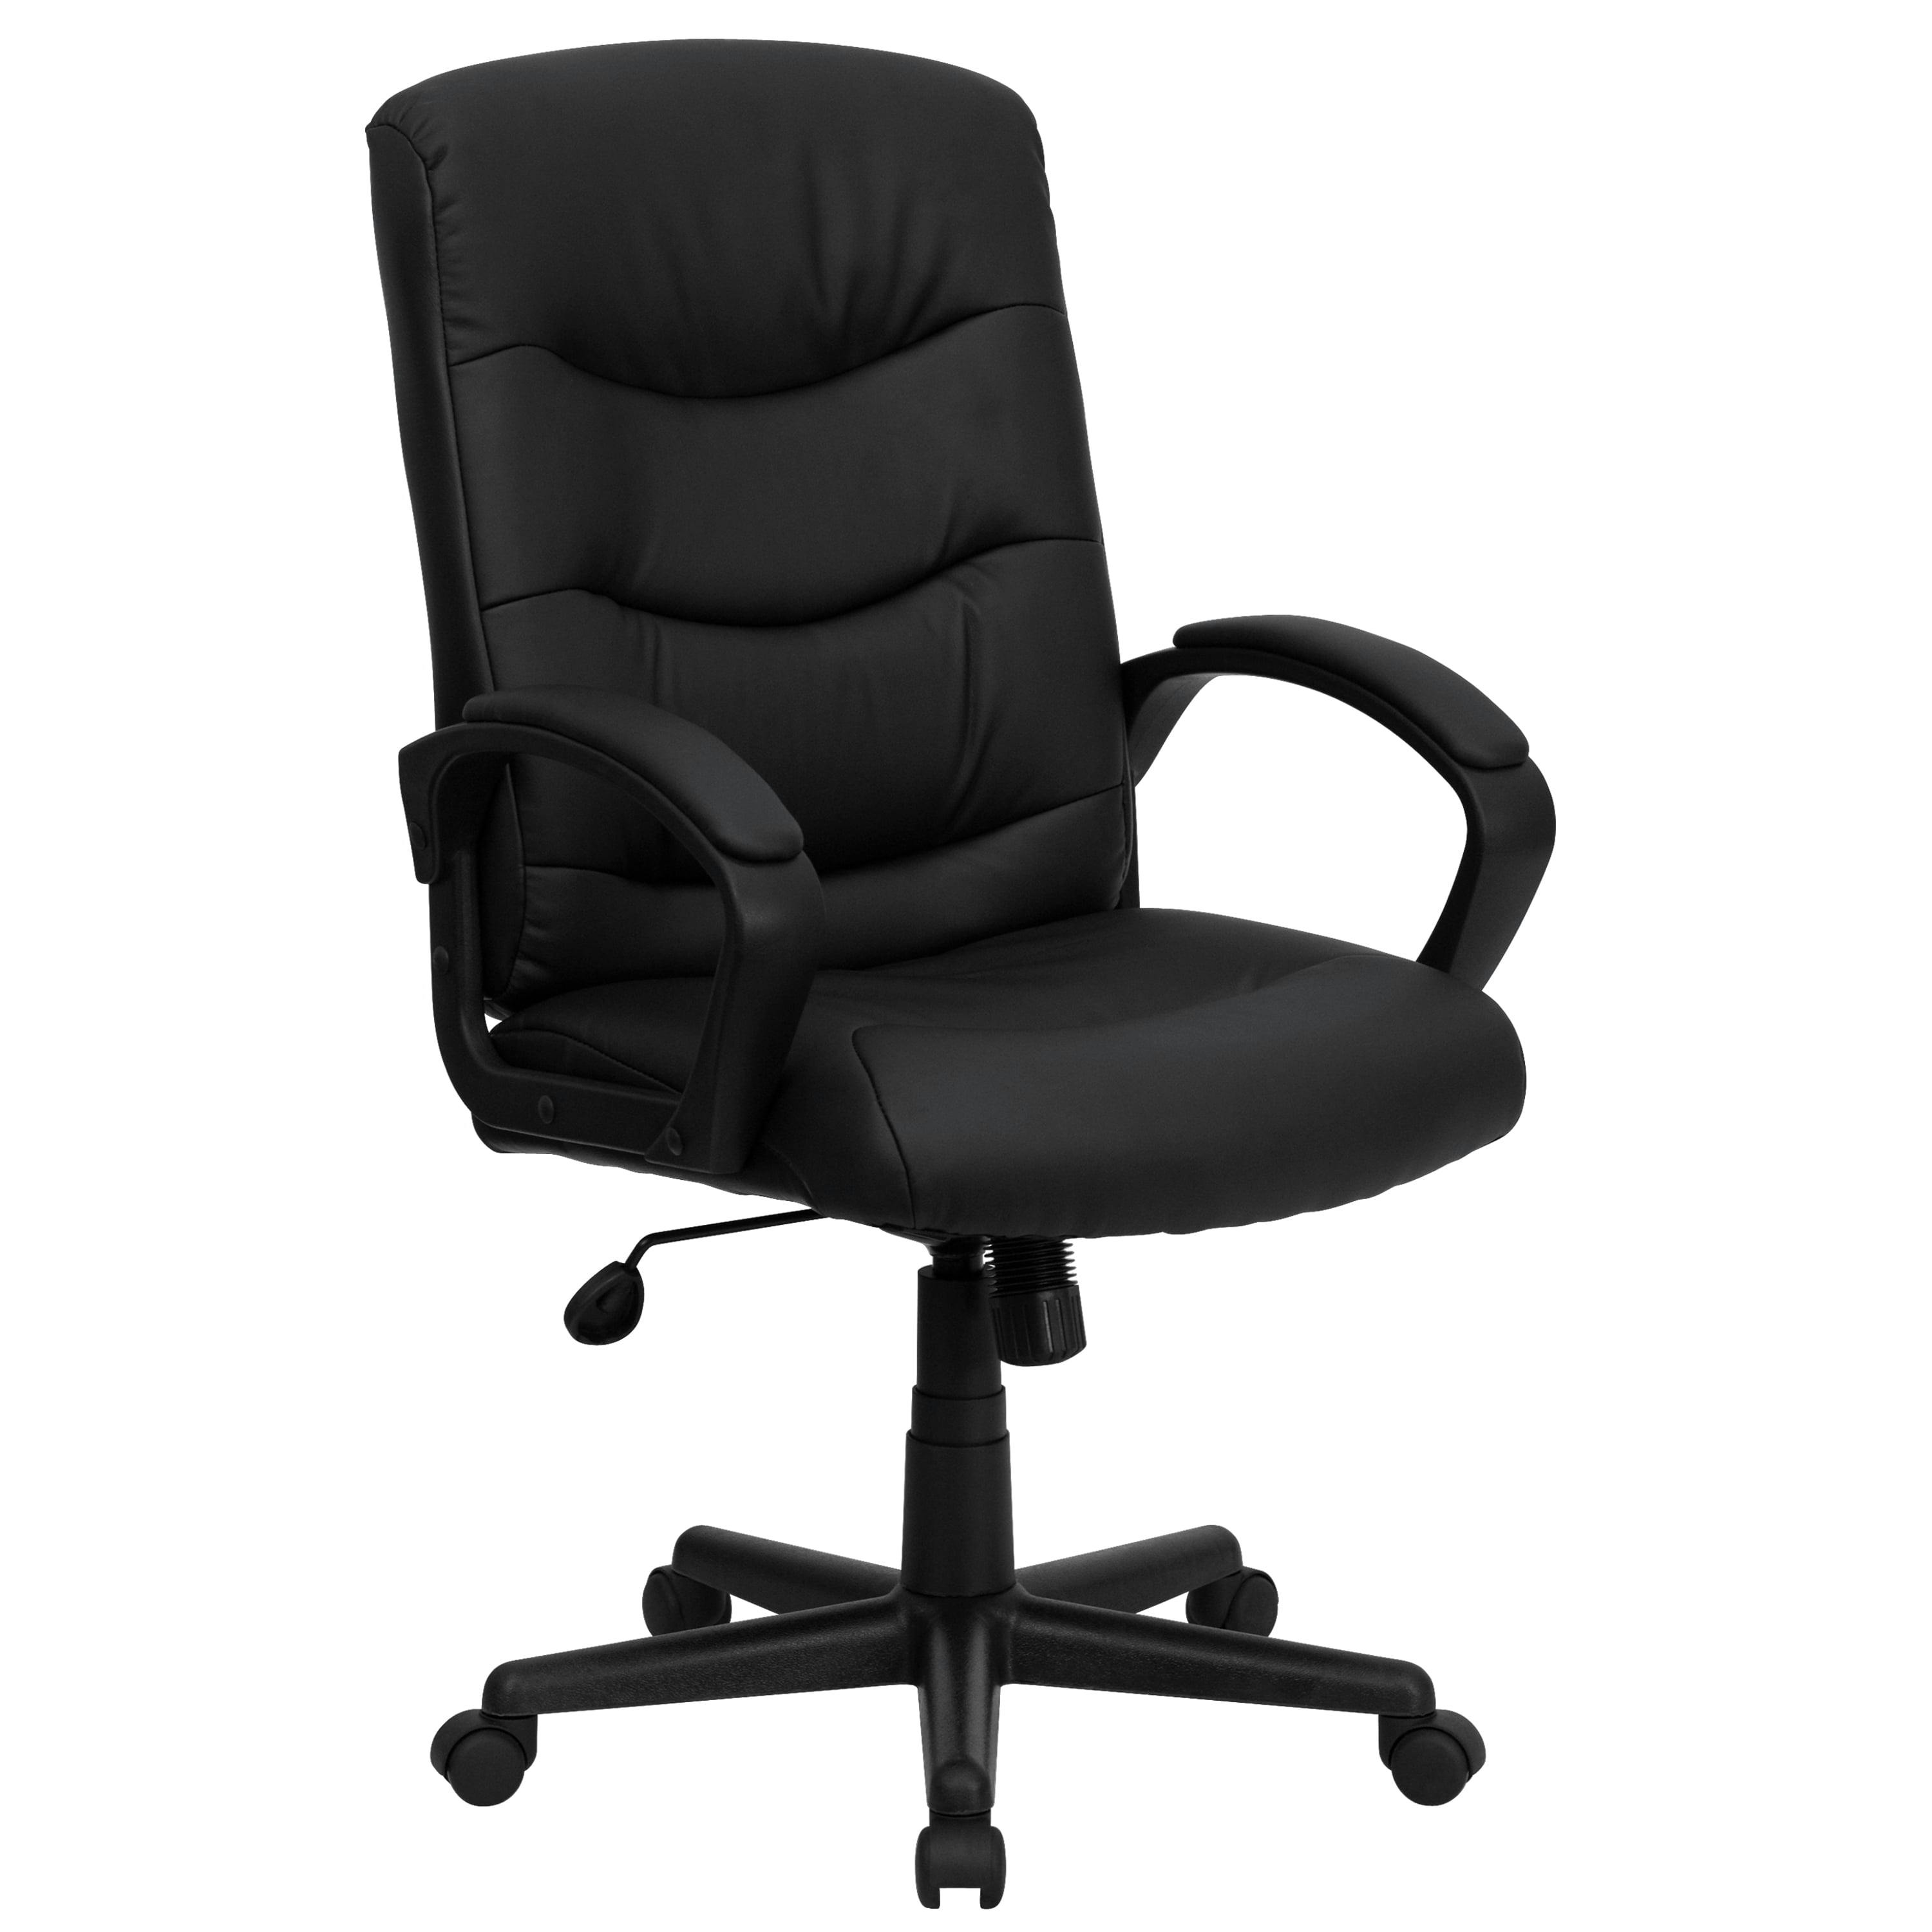 Ergonomic Black LeatherSoft Swivel Task Chair with Lumbar Support